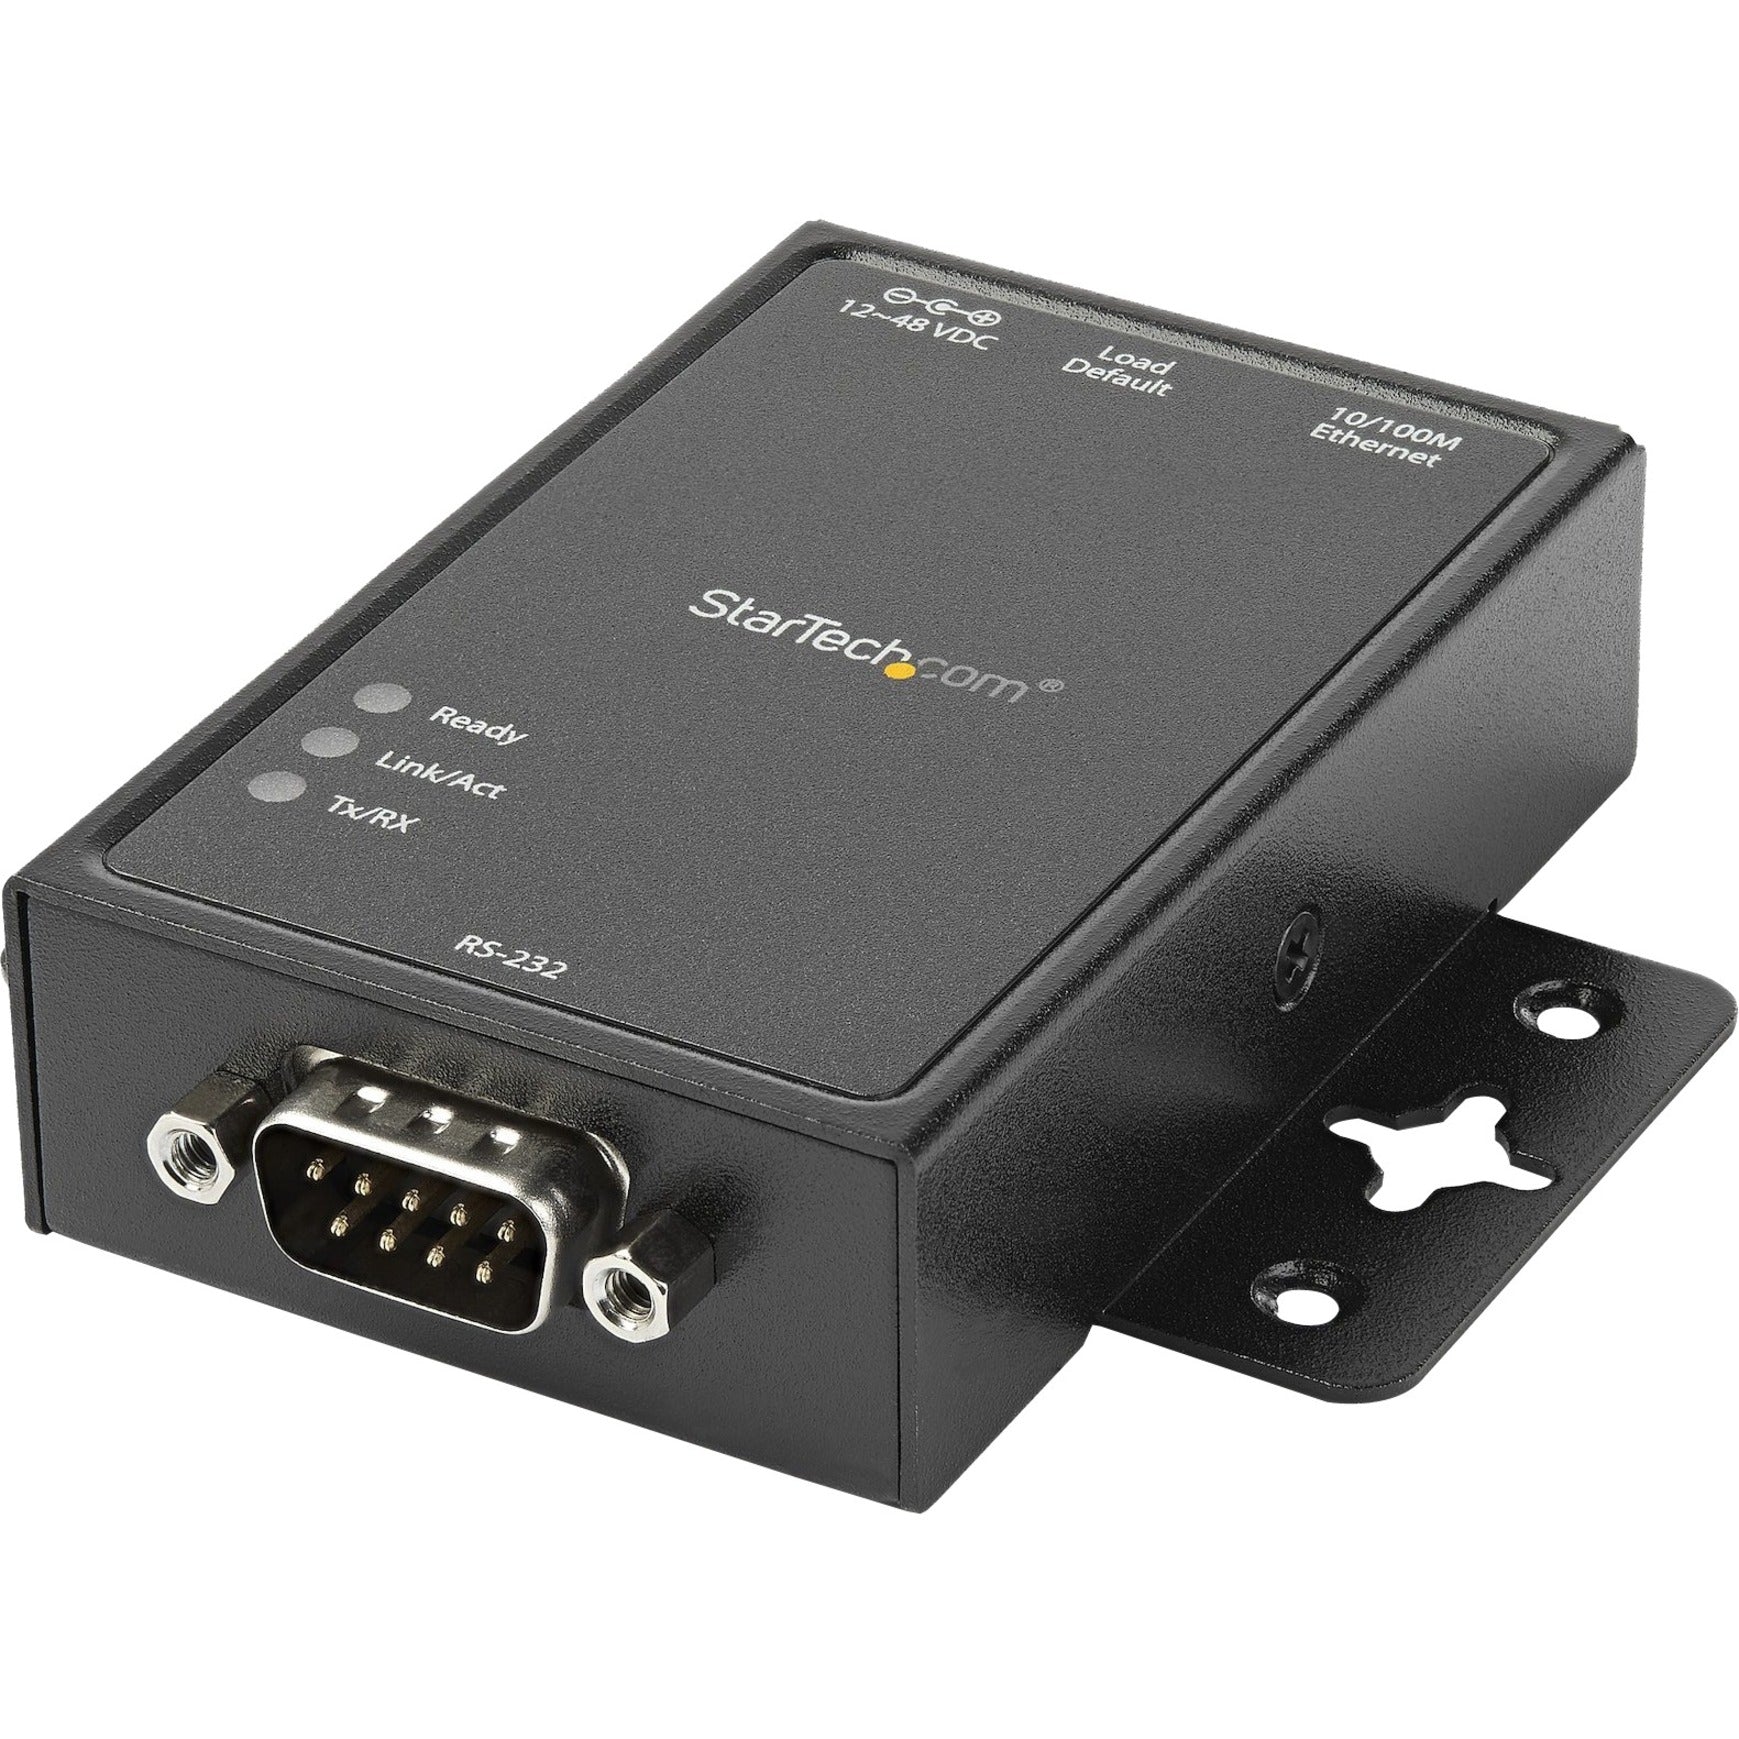 StarTech.com NETRS2321P 1 Port RS232 Serial to IP Ethernet Converter / Device Server - Aluminum, 2 Year Warranty, TAA Compliant